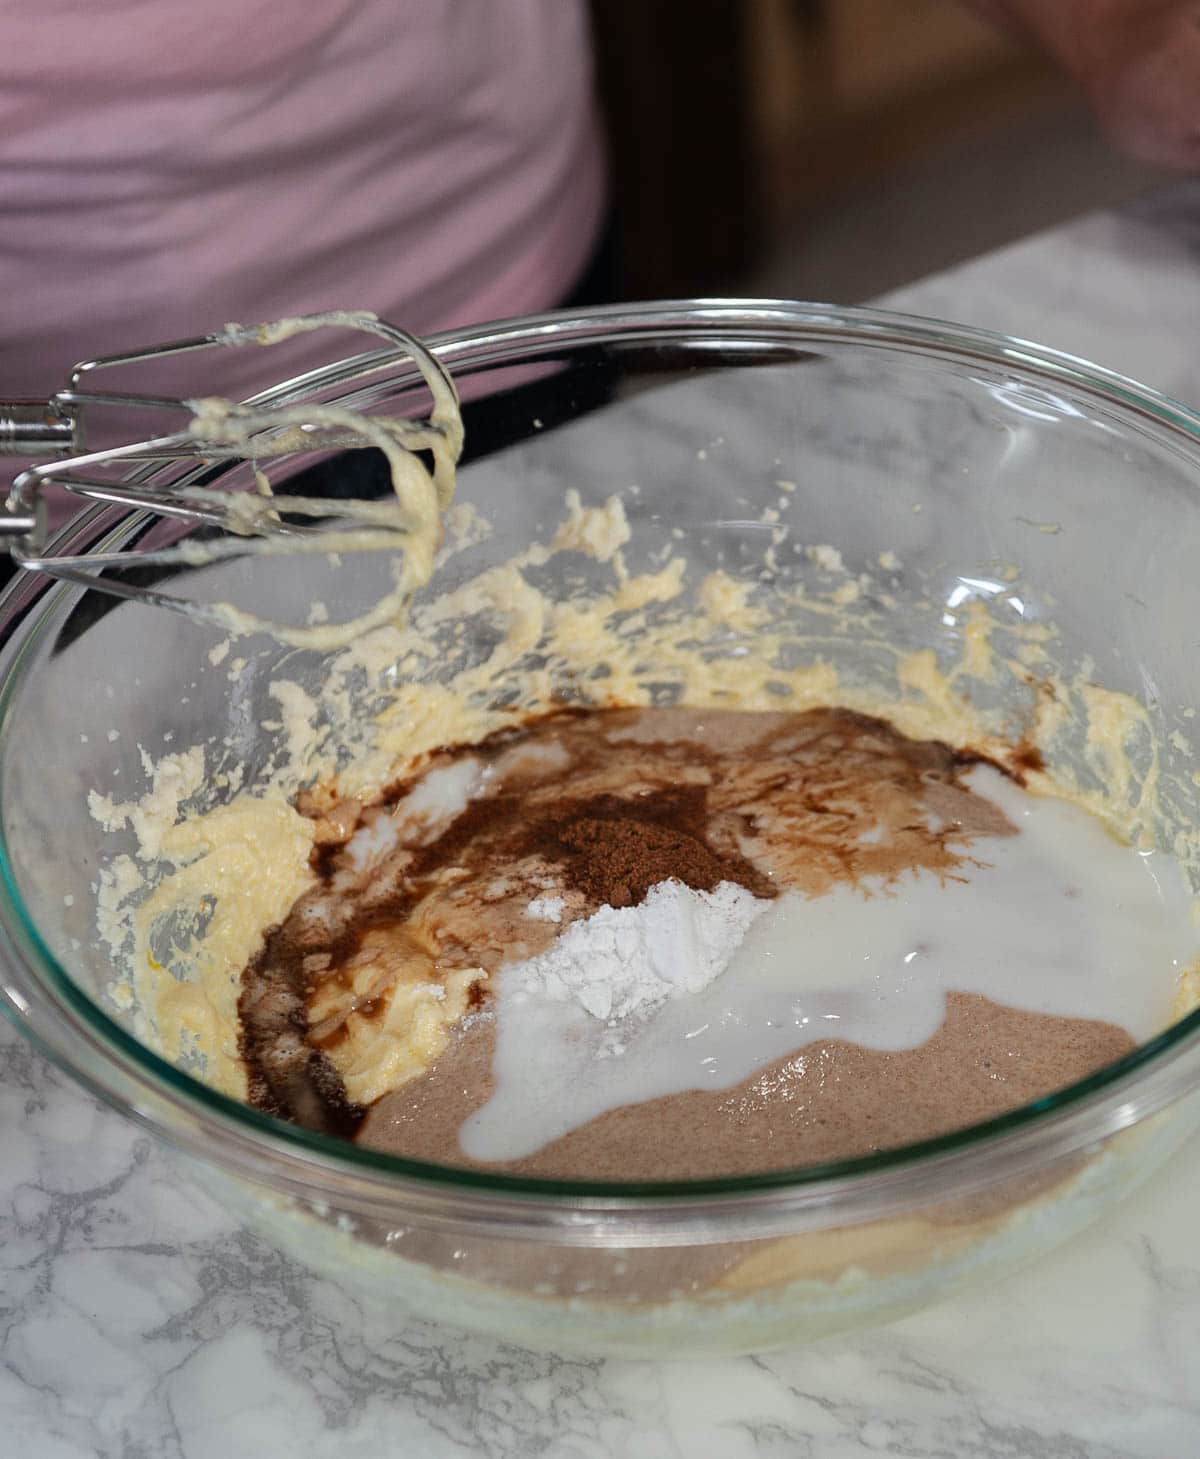 mixing sourdough donut ingredients in a glass bowl